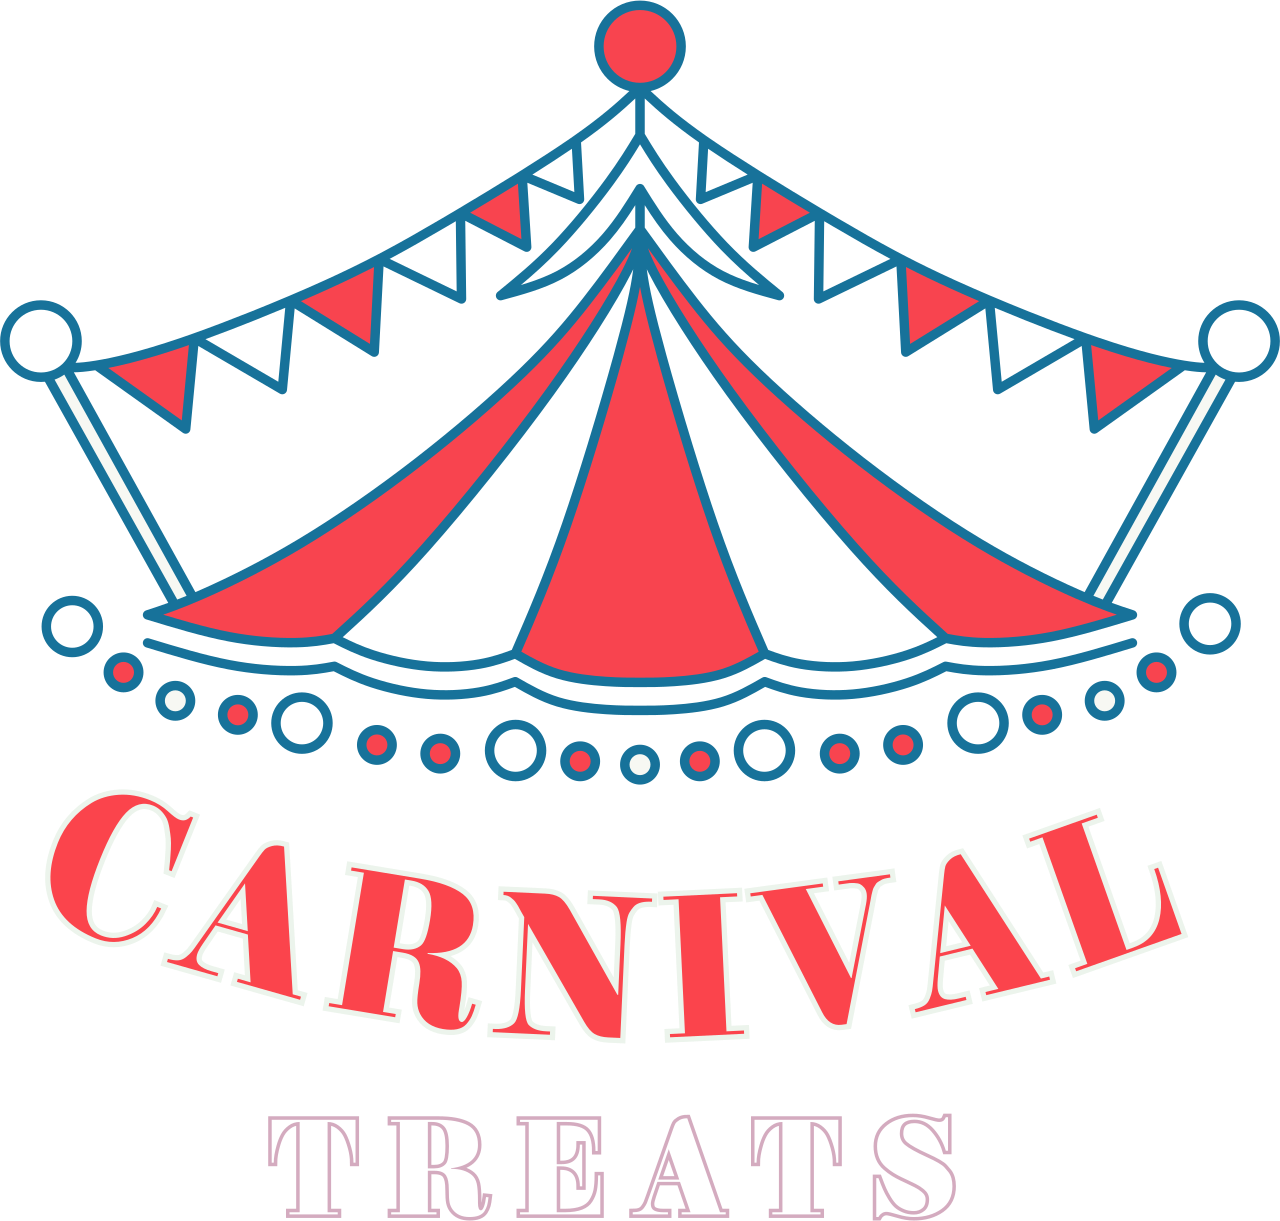 Welcome to carnival treats!'s web page